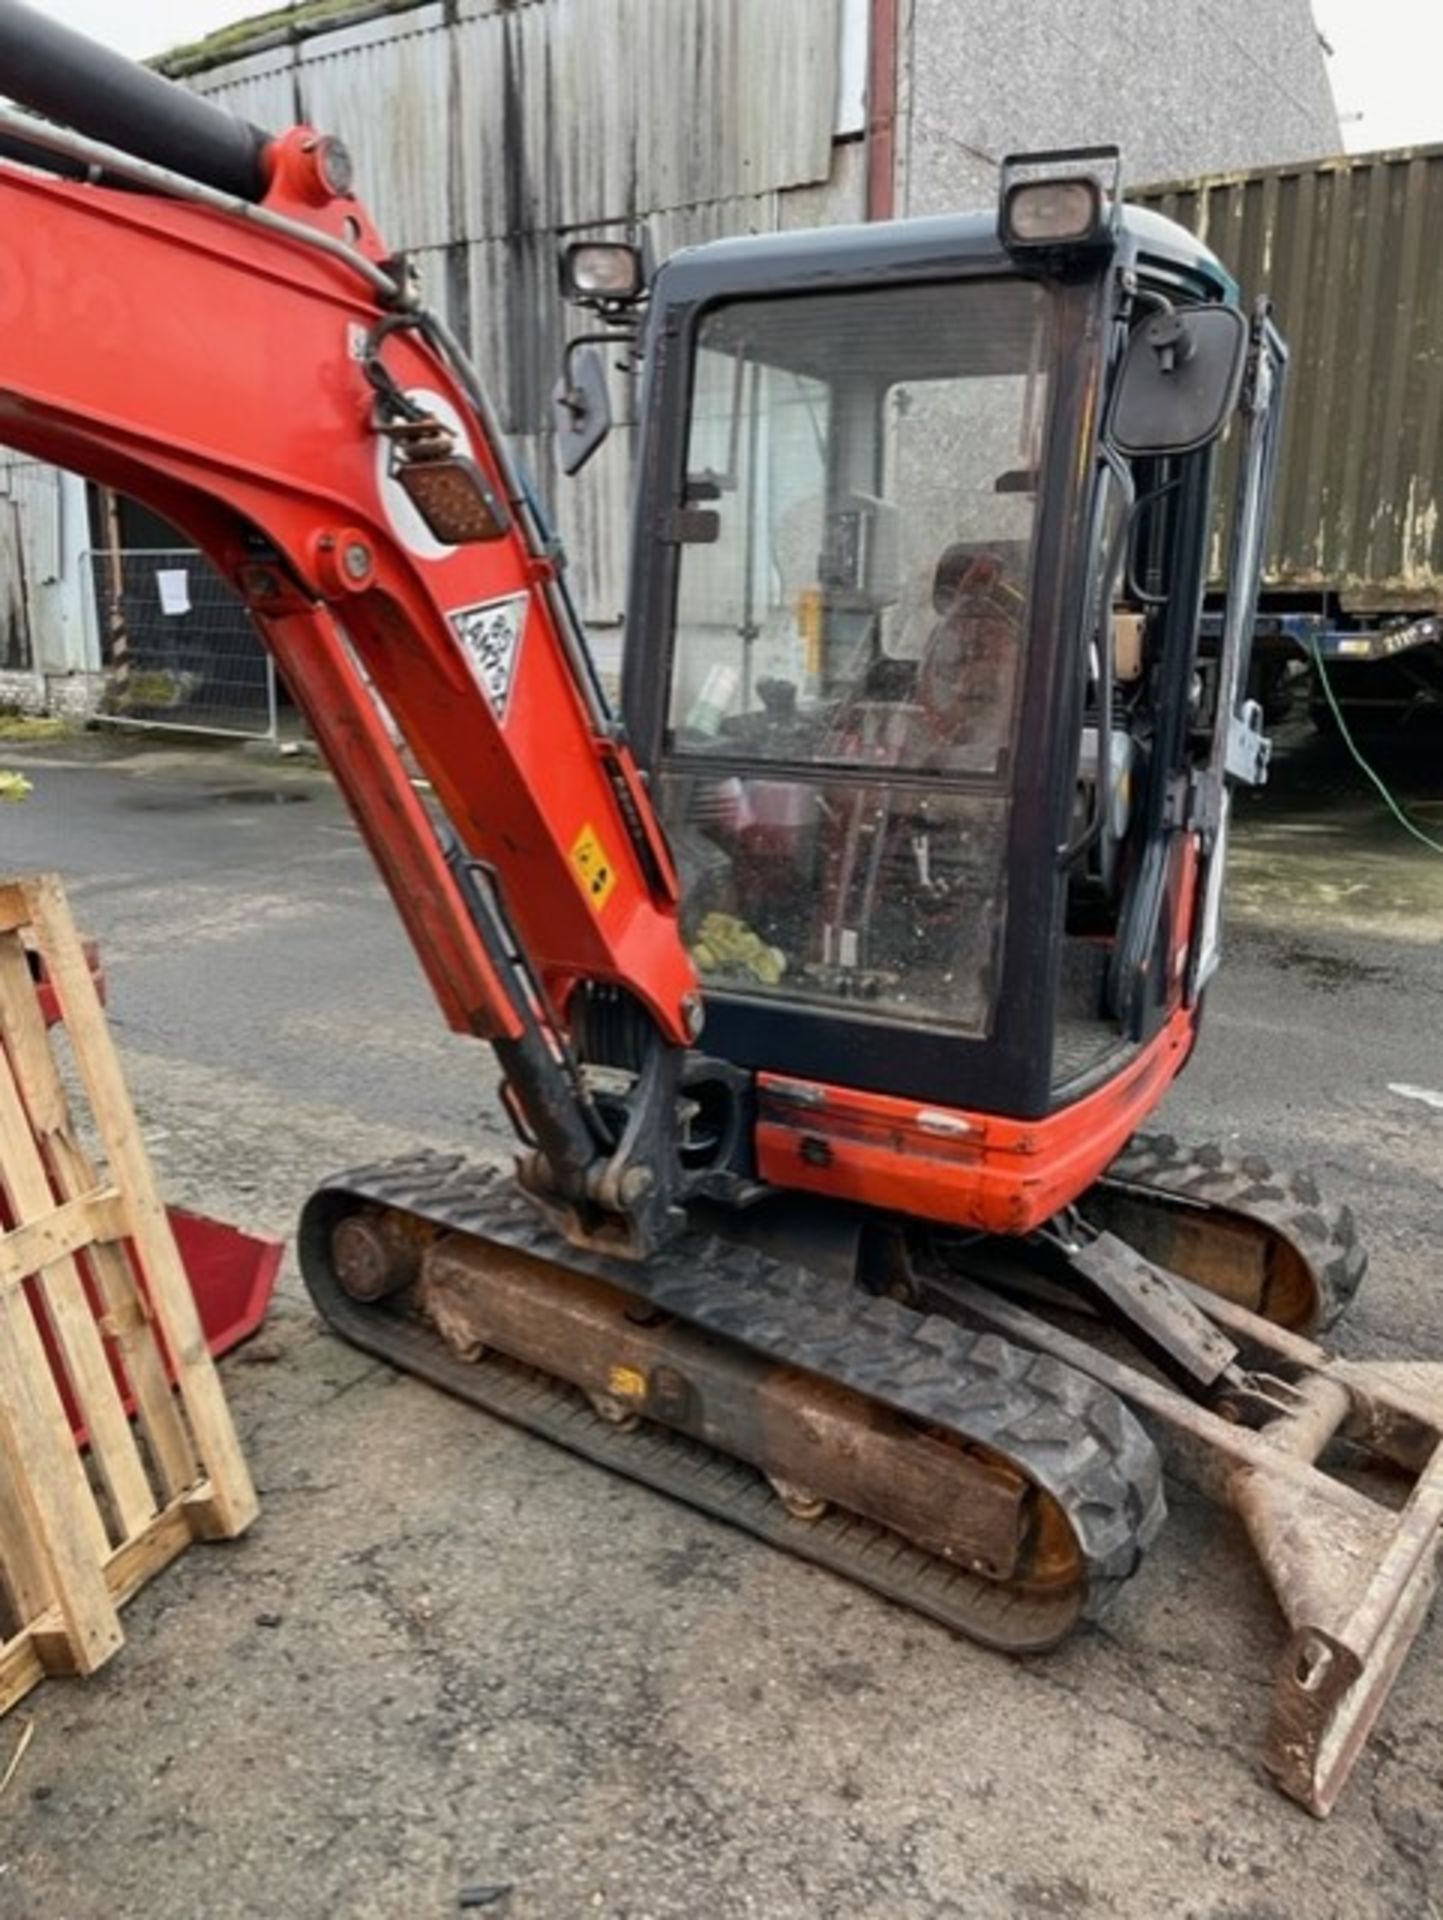 Kubota kx71  3 ton excavator 2015 in very decent condition all working always serviced 3k plus hours - Image 6 of 9